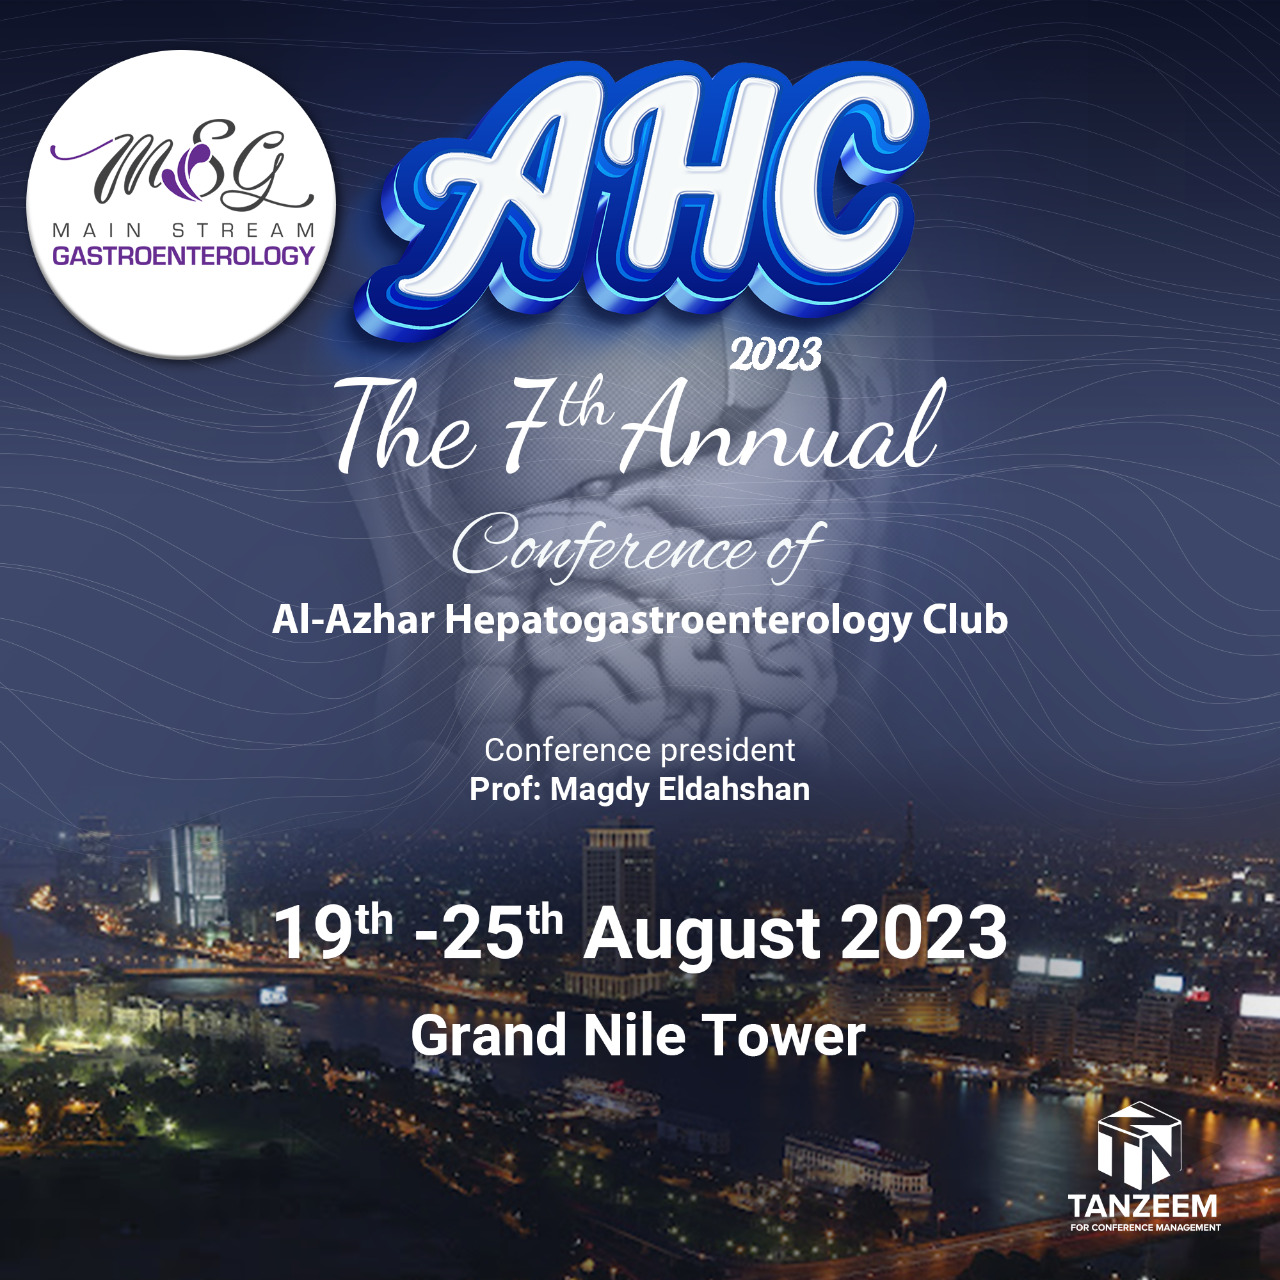 AHC 2023 The 7th Annual Conference of Al Azhar Hepatogastroenterology Club